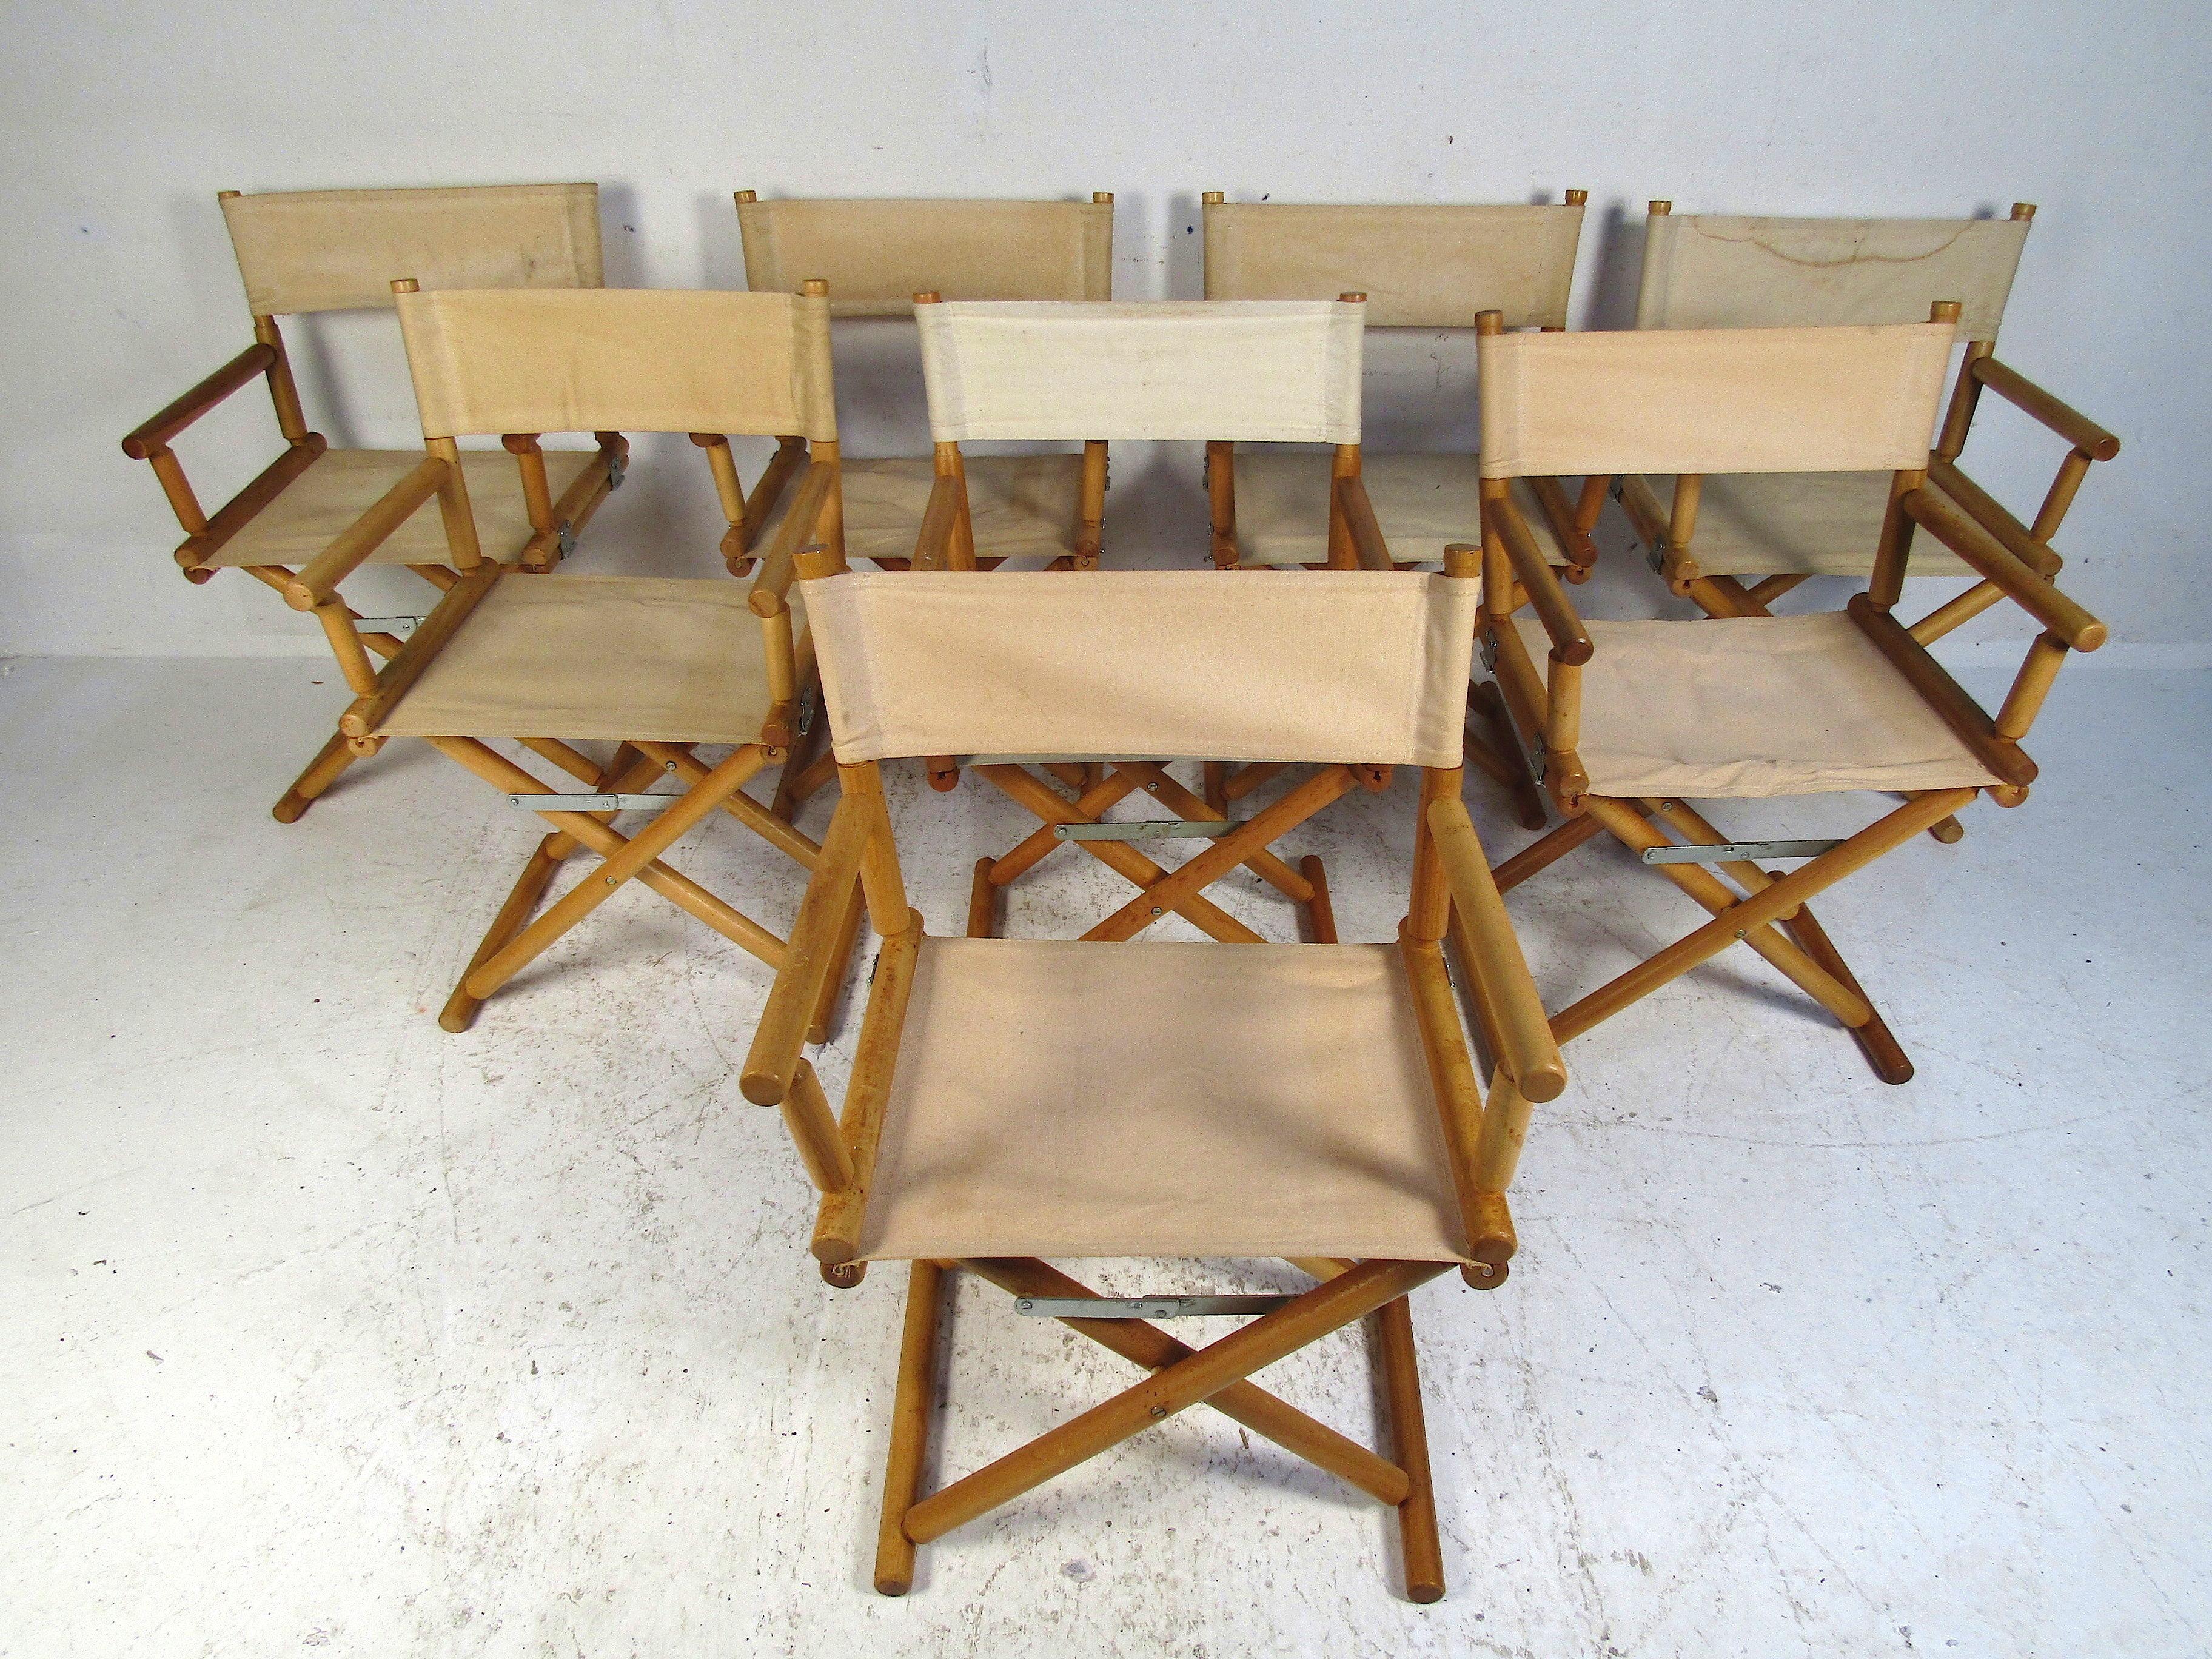 Vintage hardwood; deep grained folding chairs with a canvas seat and back. Inspired by a mid-century movie studio; this set will complete any home bar or home office setup. Additionally, the backs can be removed from these chairs making a stylish